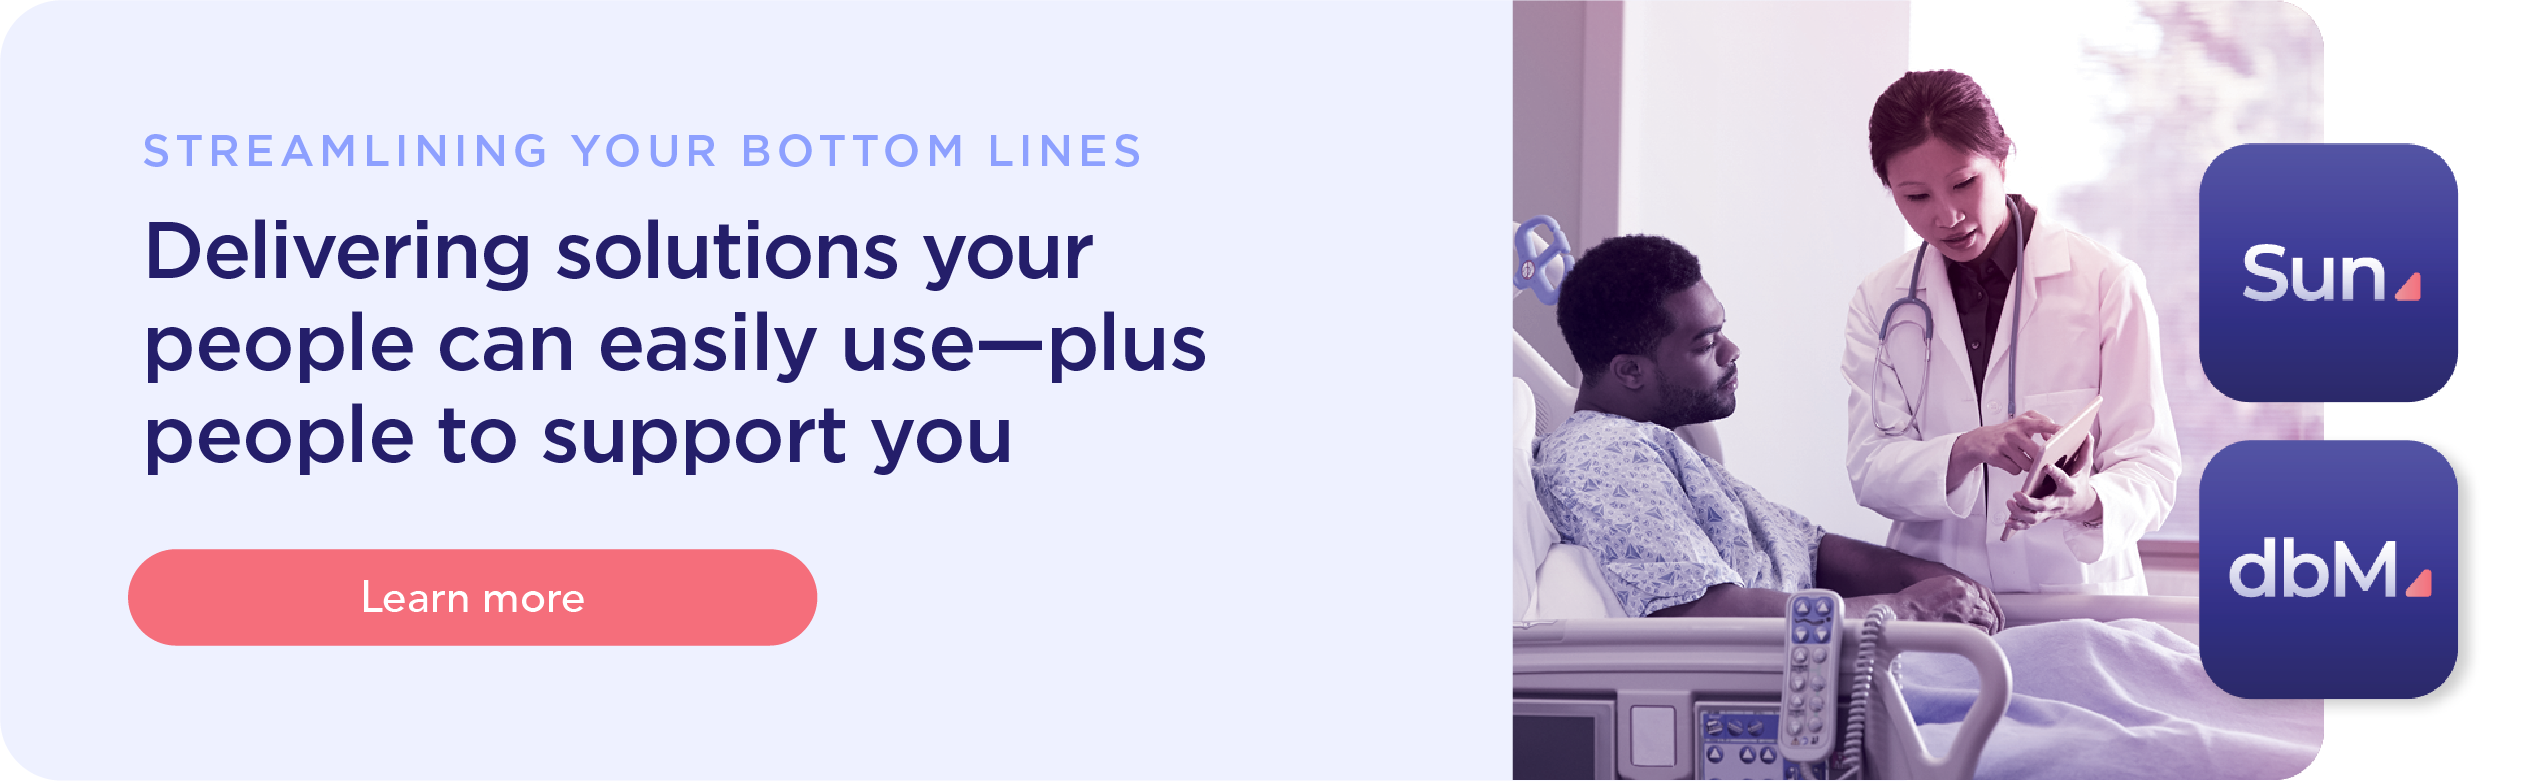 Delivering solutions your people can easily use - plus people to support. Learn more at our streamlining your bottom line landing page.